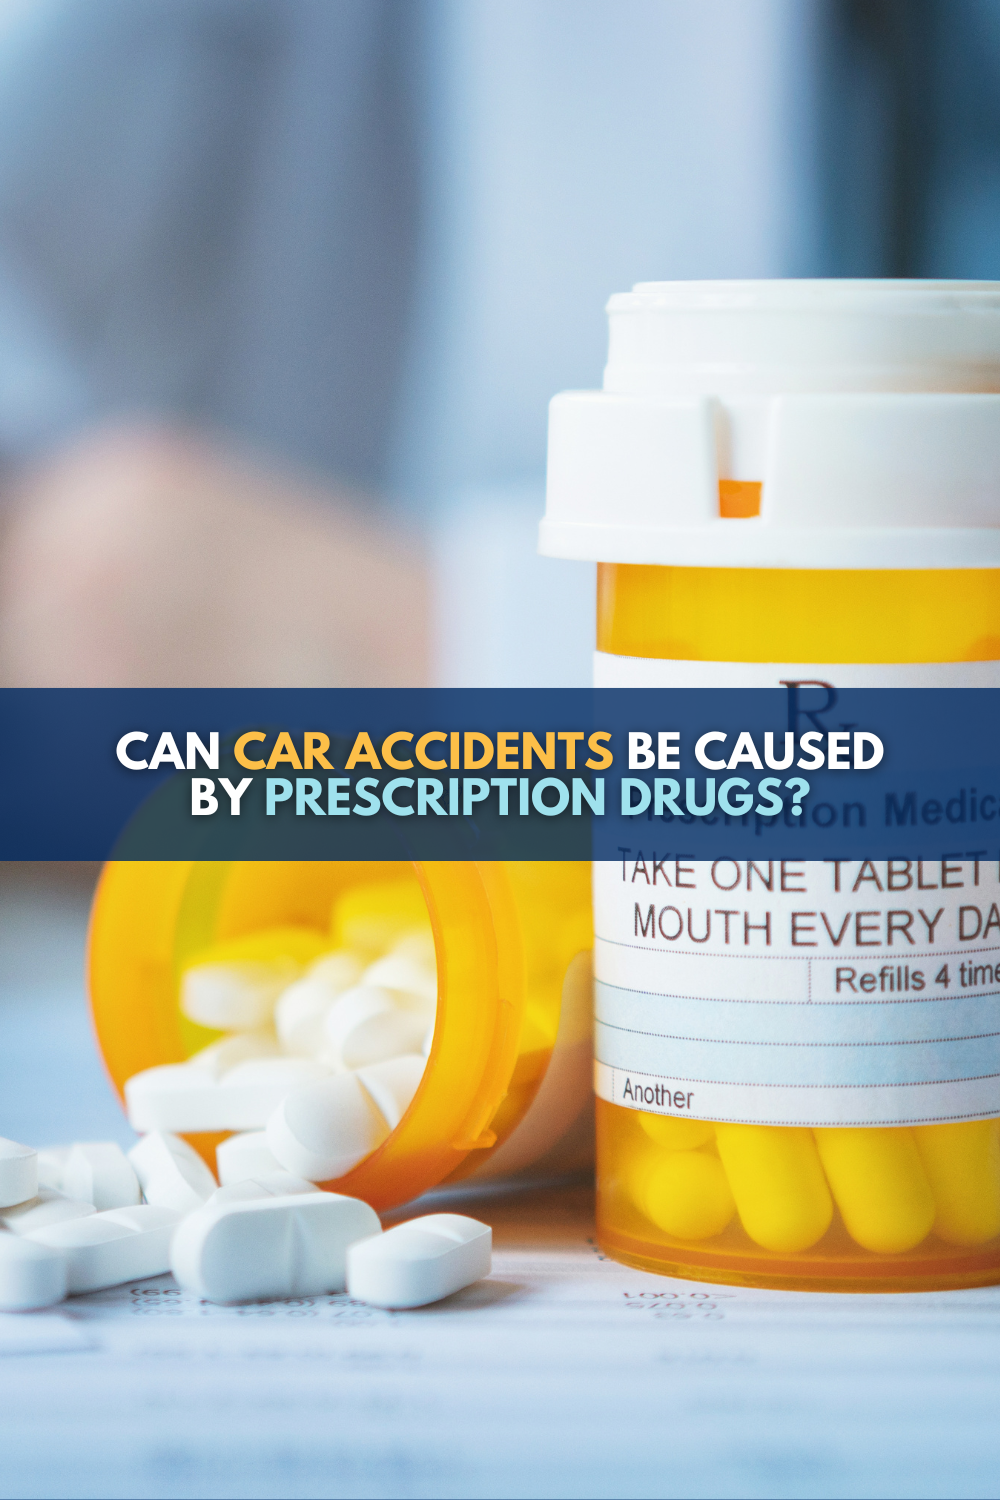 Can Car Accidents Be Caused By Prescription Drugs?